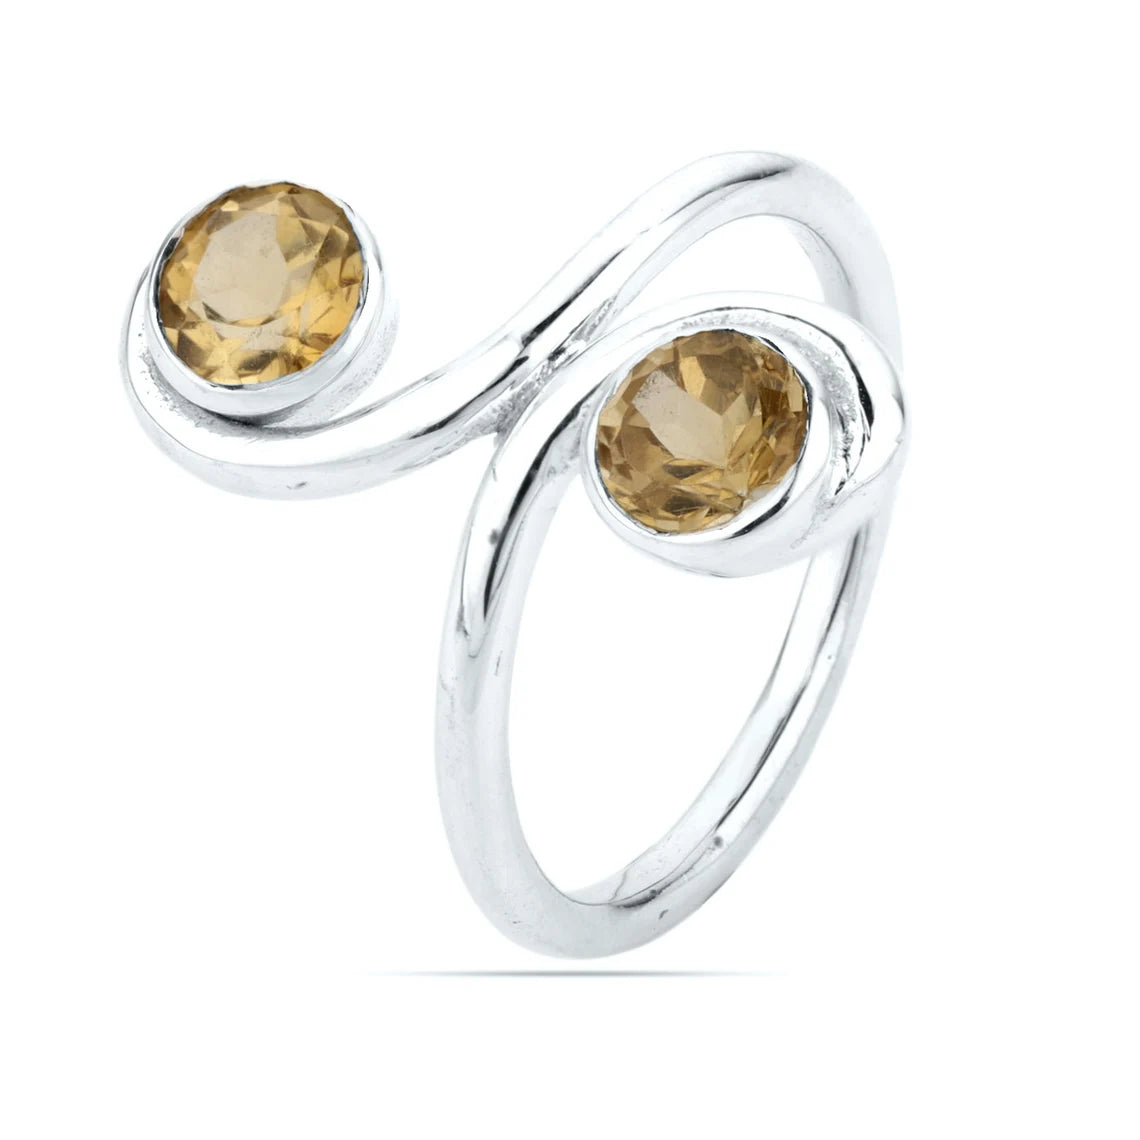 Round shape Citrine Stone Studded 925 Sterling Silver Ring